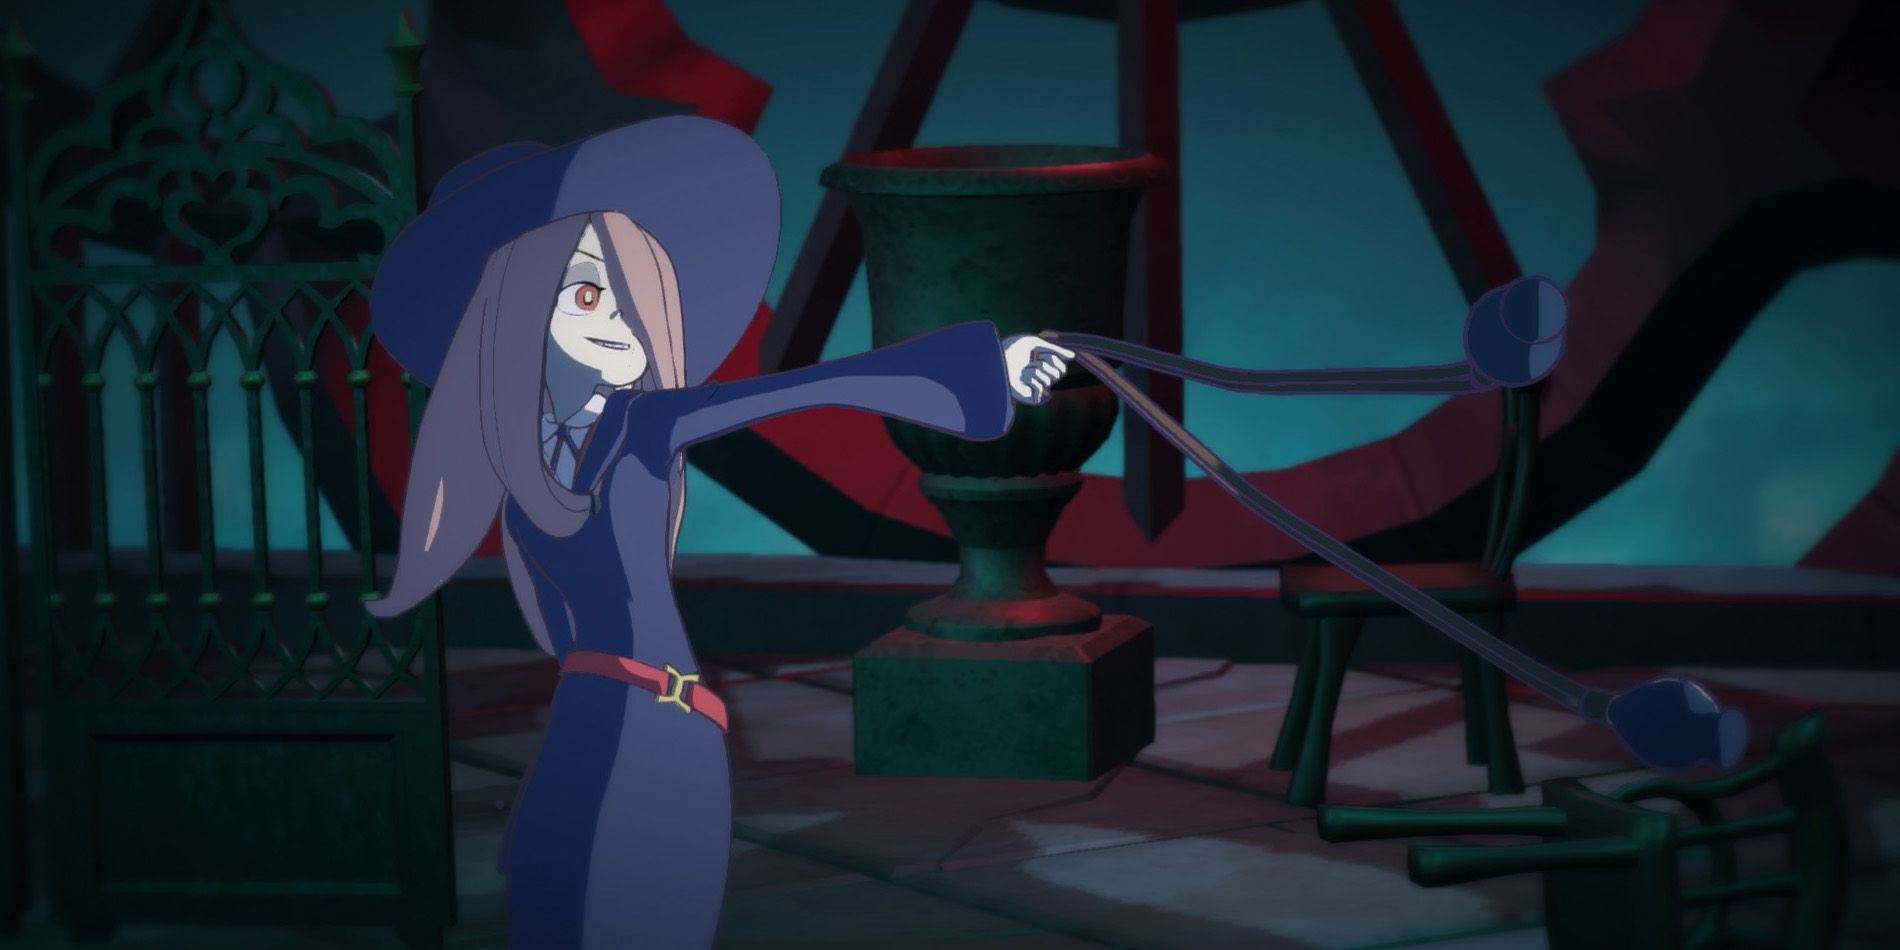 4. Little Witch Academia: Chamber of Time